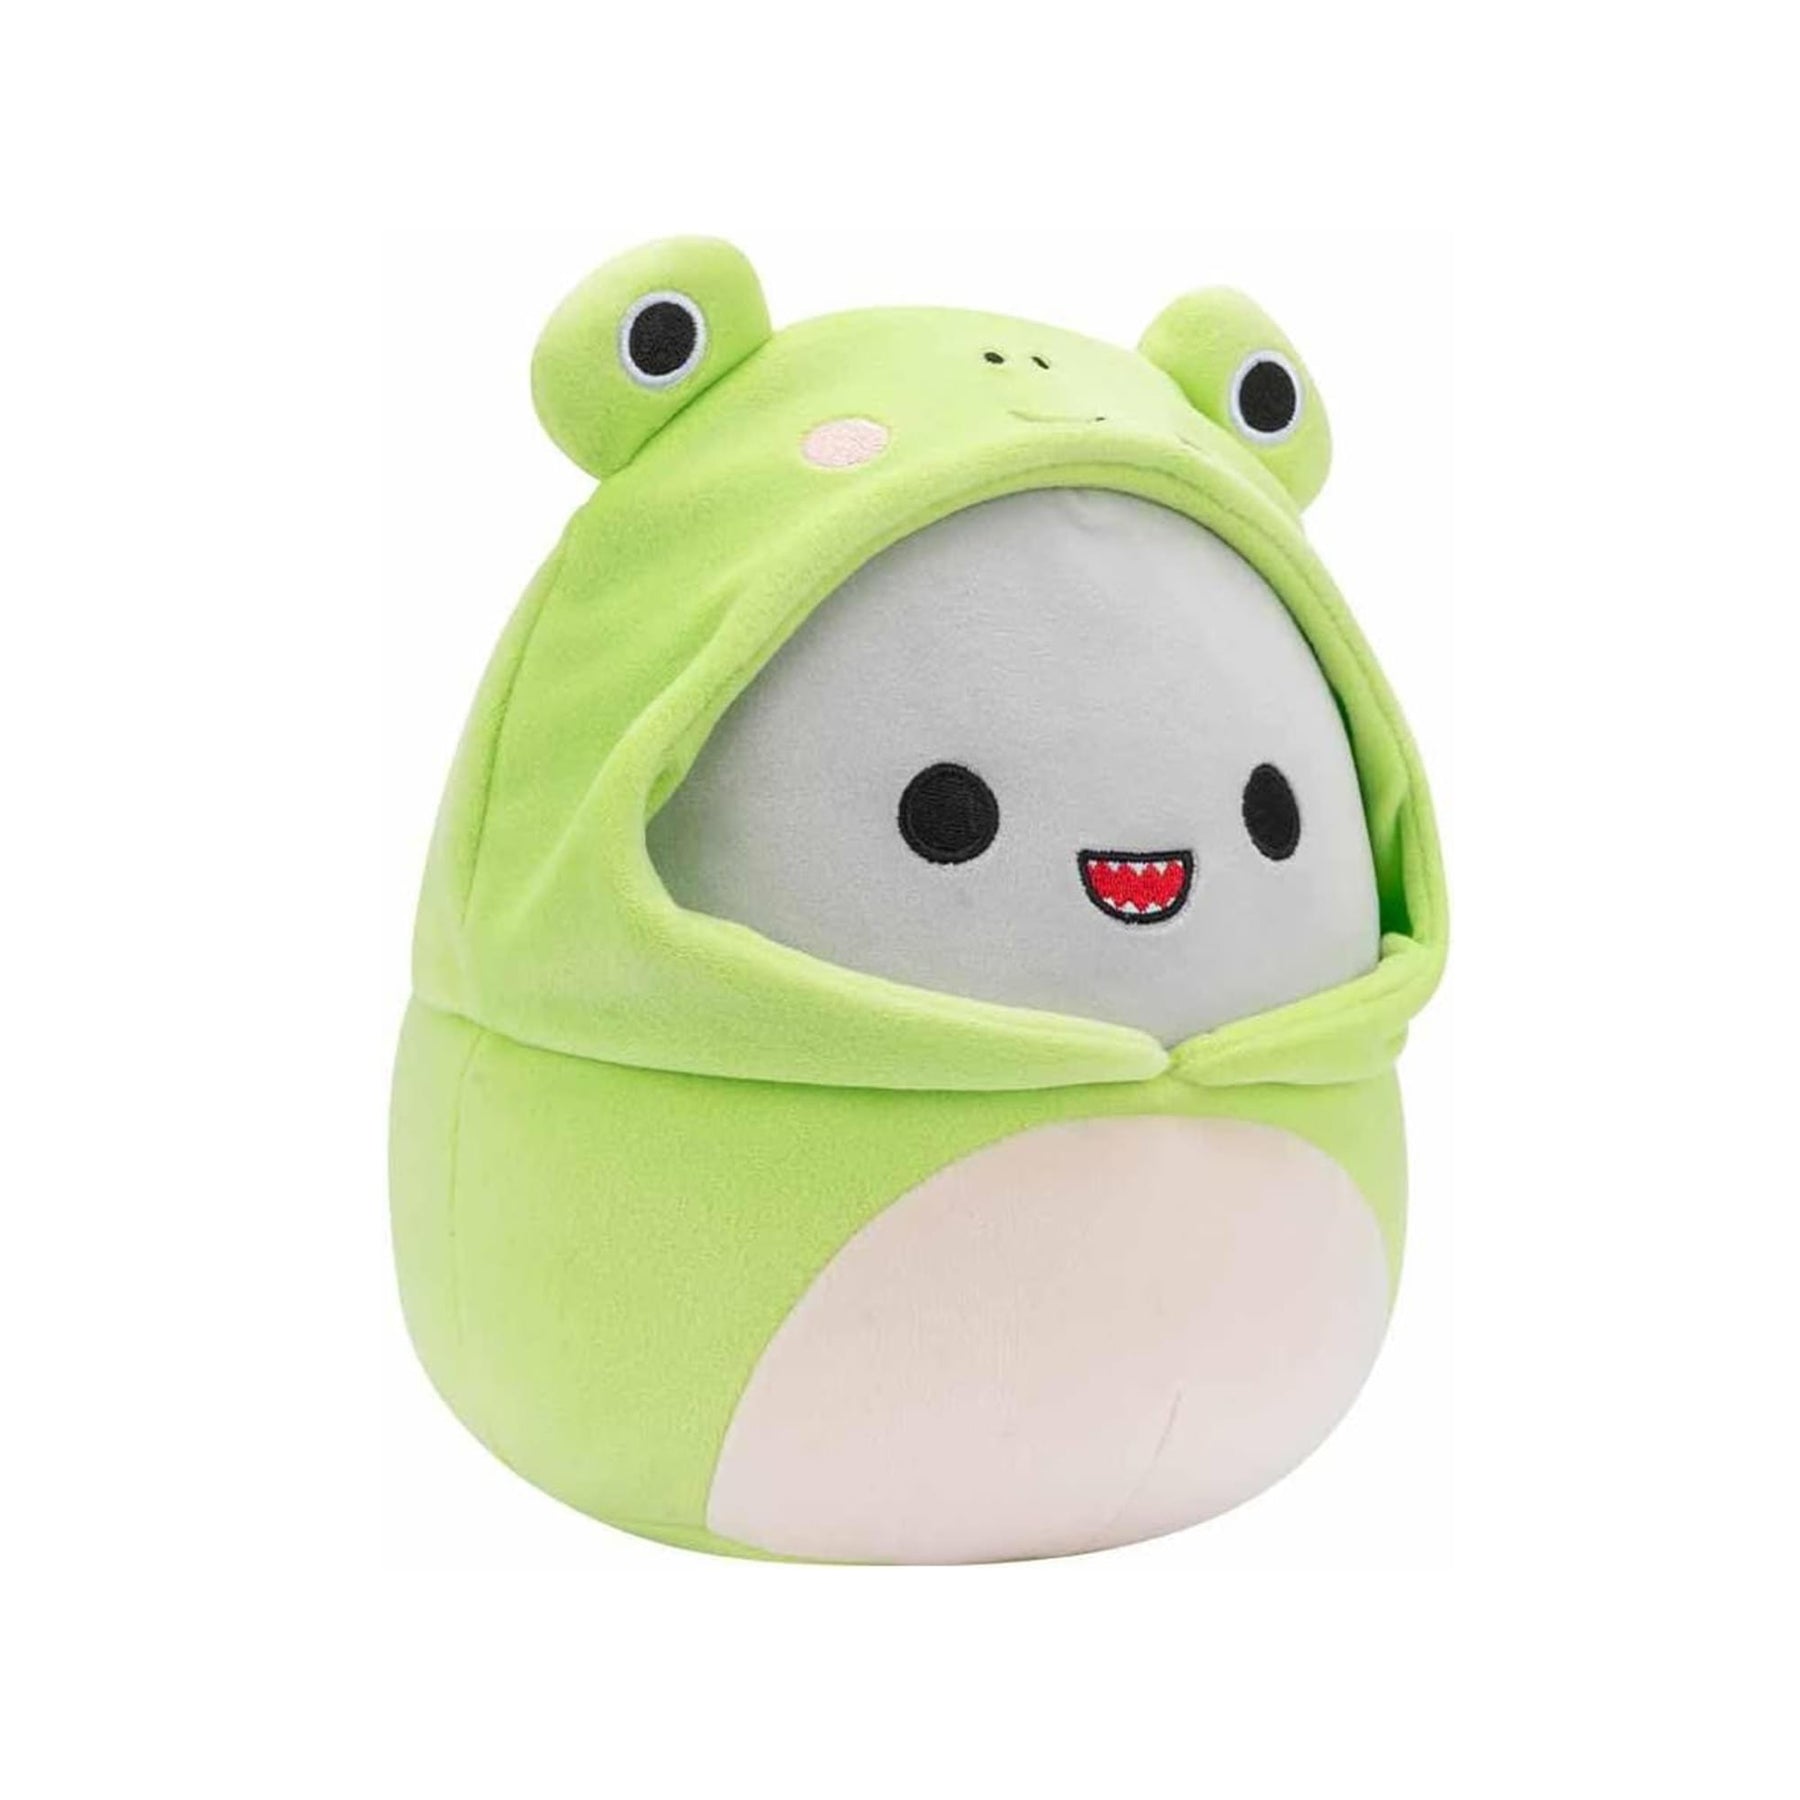 Squishmallows Easter Squad 5 Inch Plush | Gordon the Shark in Frog Hoodie